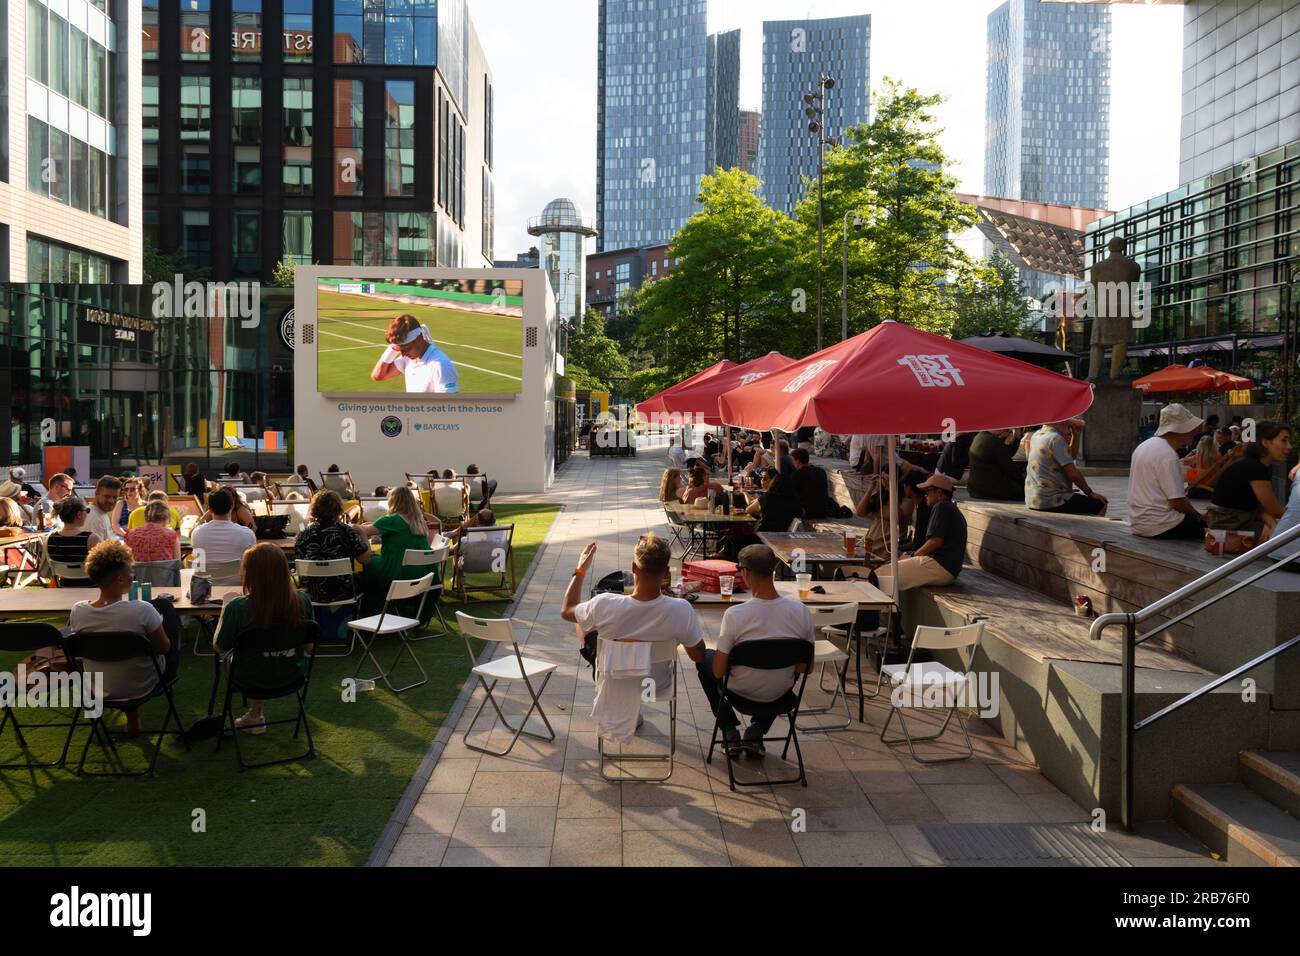 Tony Wilson place. Crowd watching Wimbledon tennis match on screen. People sat at tables eating and drinking. Manchester UK. Stock Photo